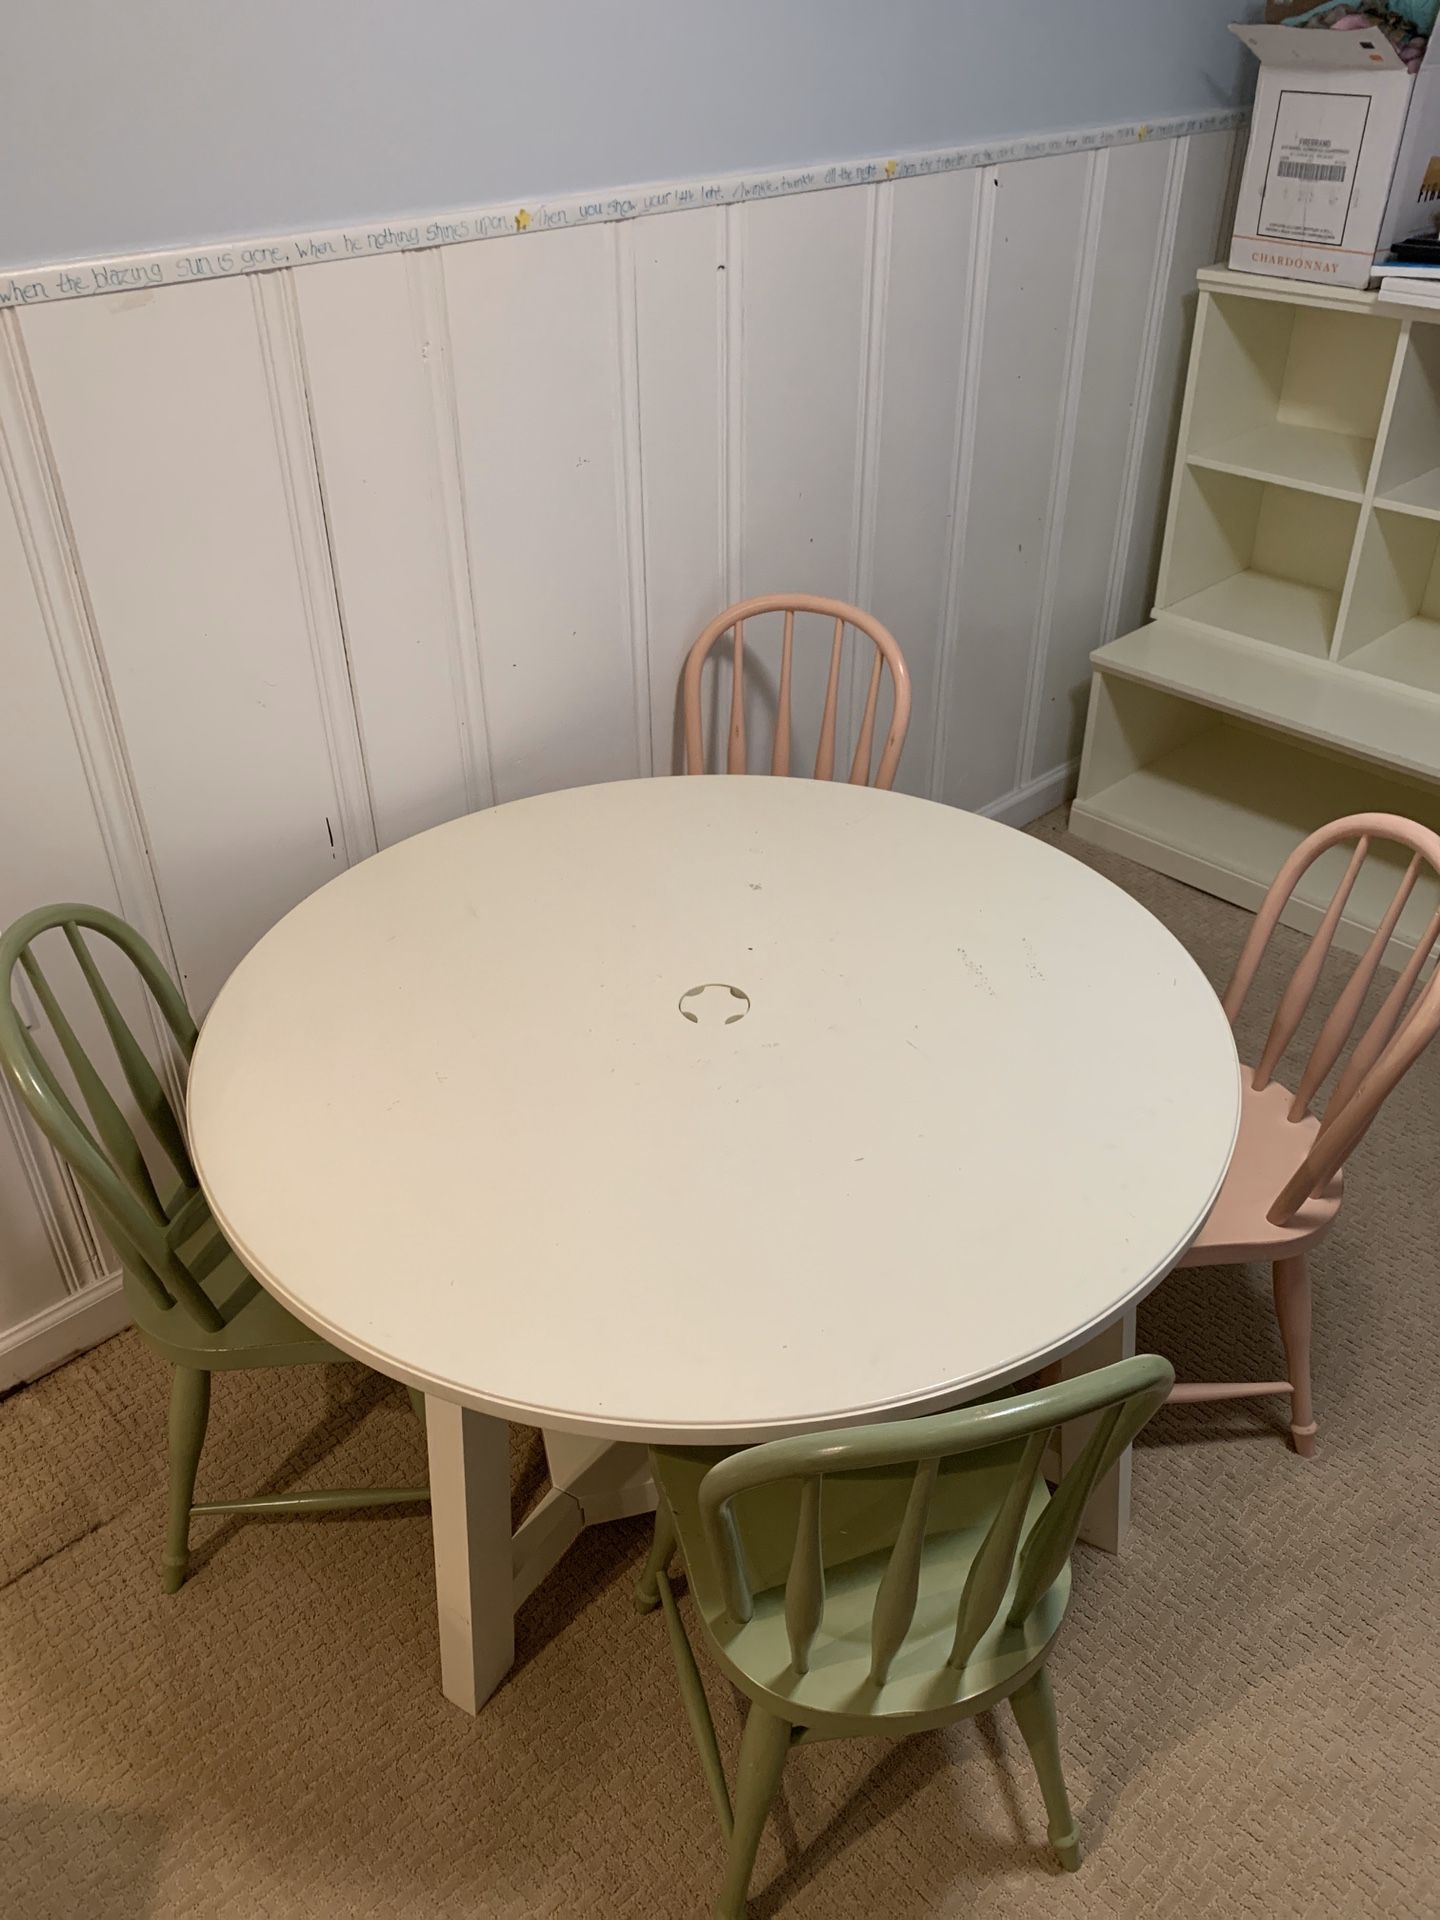 Pottery barn kids table and 4 chairs